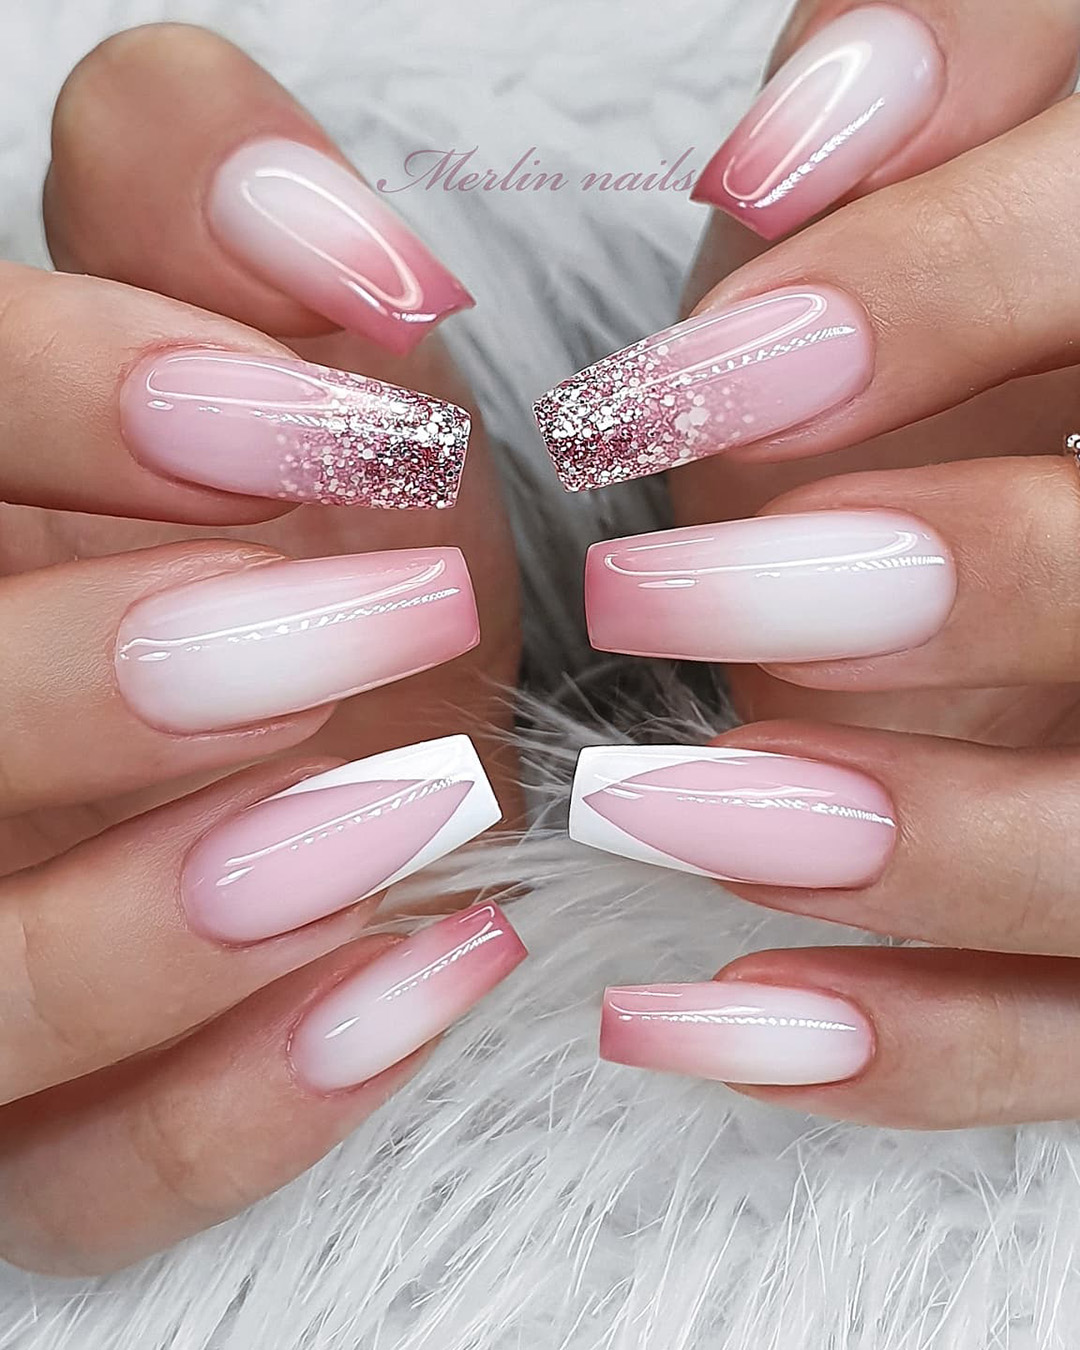 coffin wedding nails pink ombre french on one finger merlin_nails